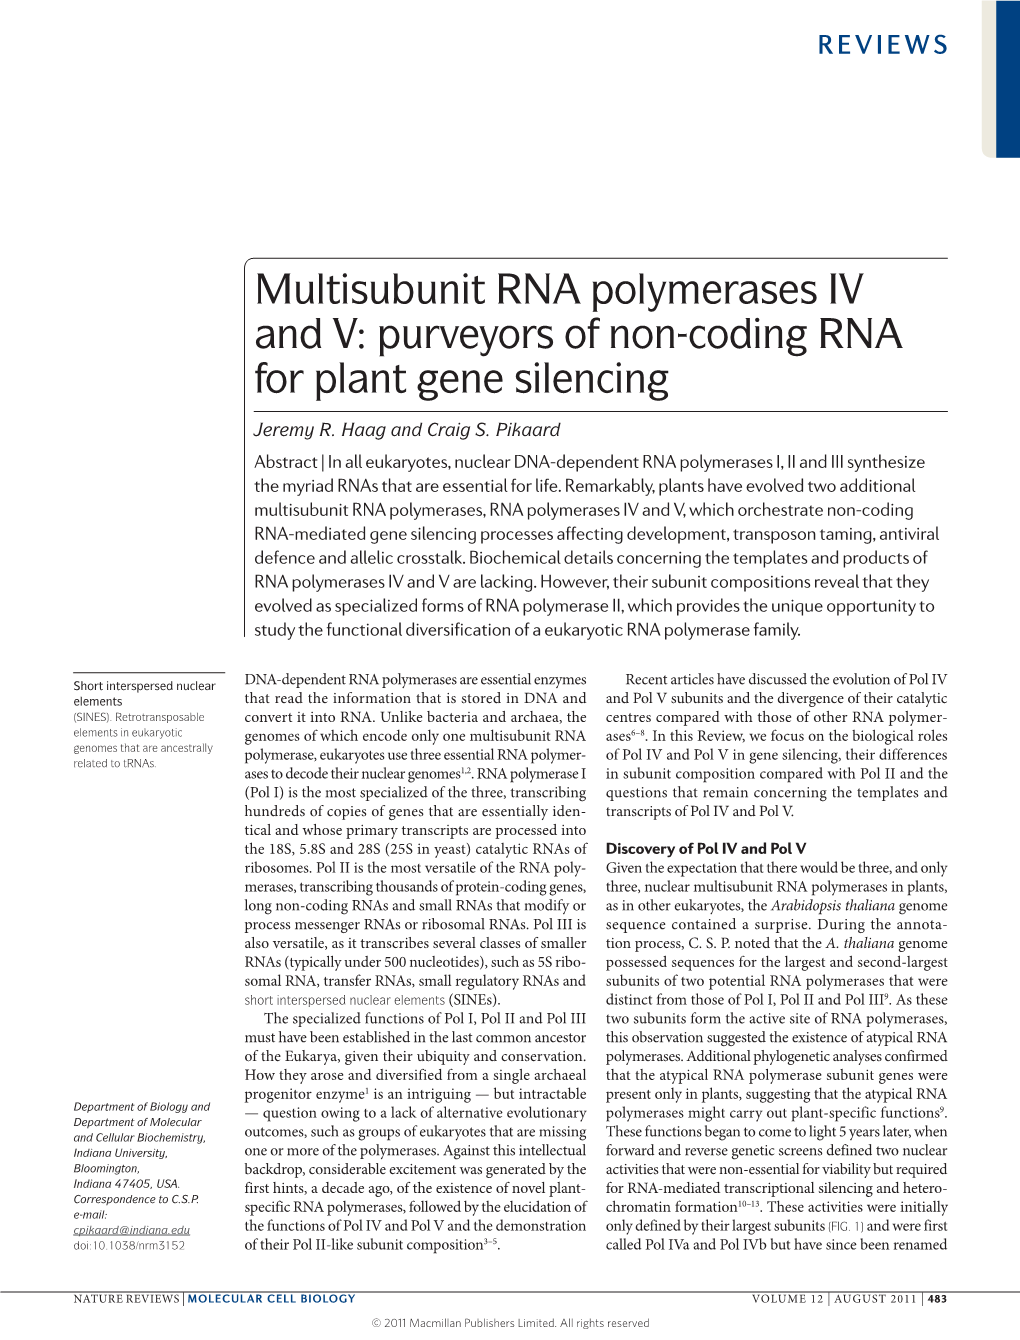 Multisubunit RNA Polymerases IV and V: Purveyors of Non-Coding RNA for Plant Gene Silencing